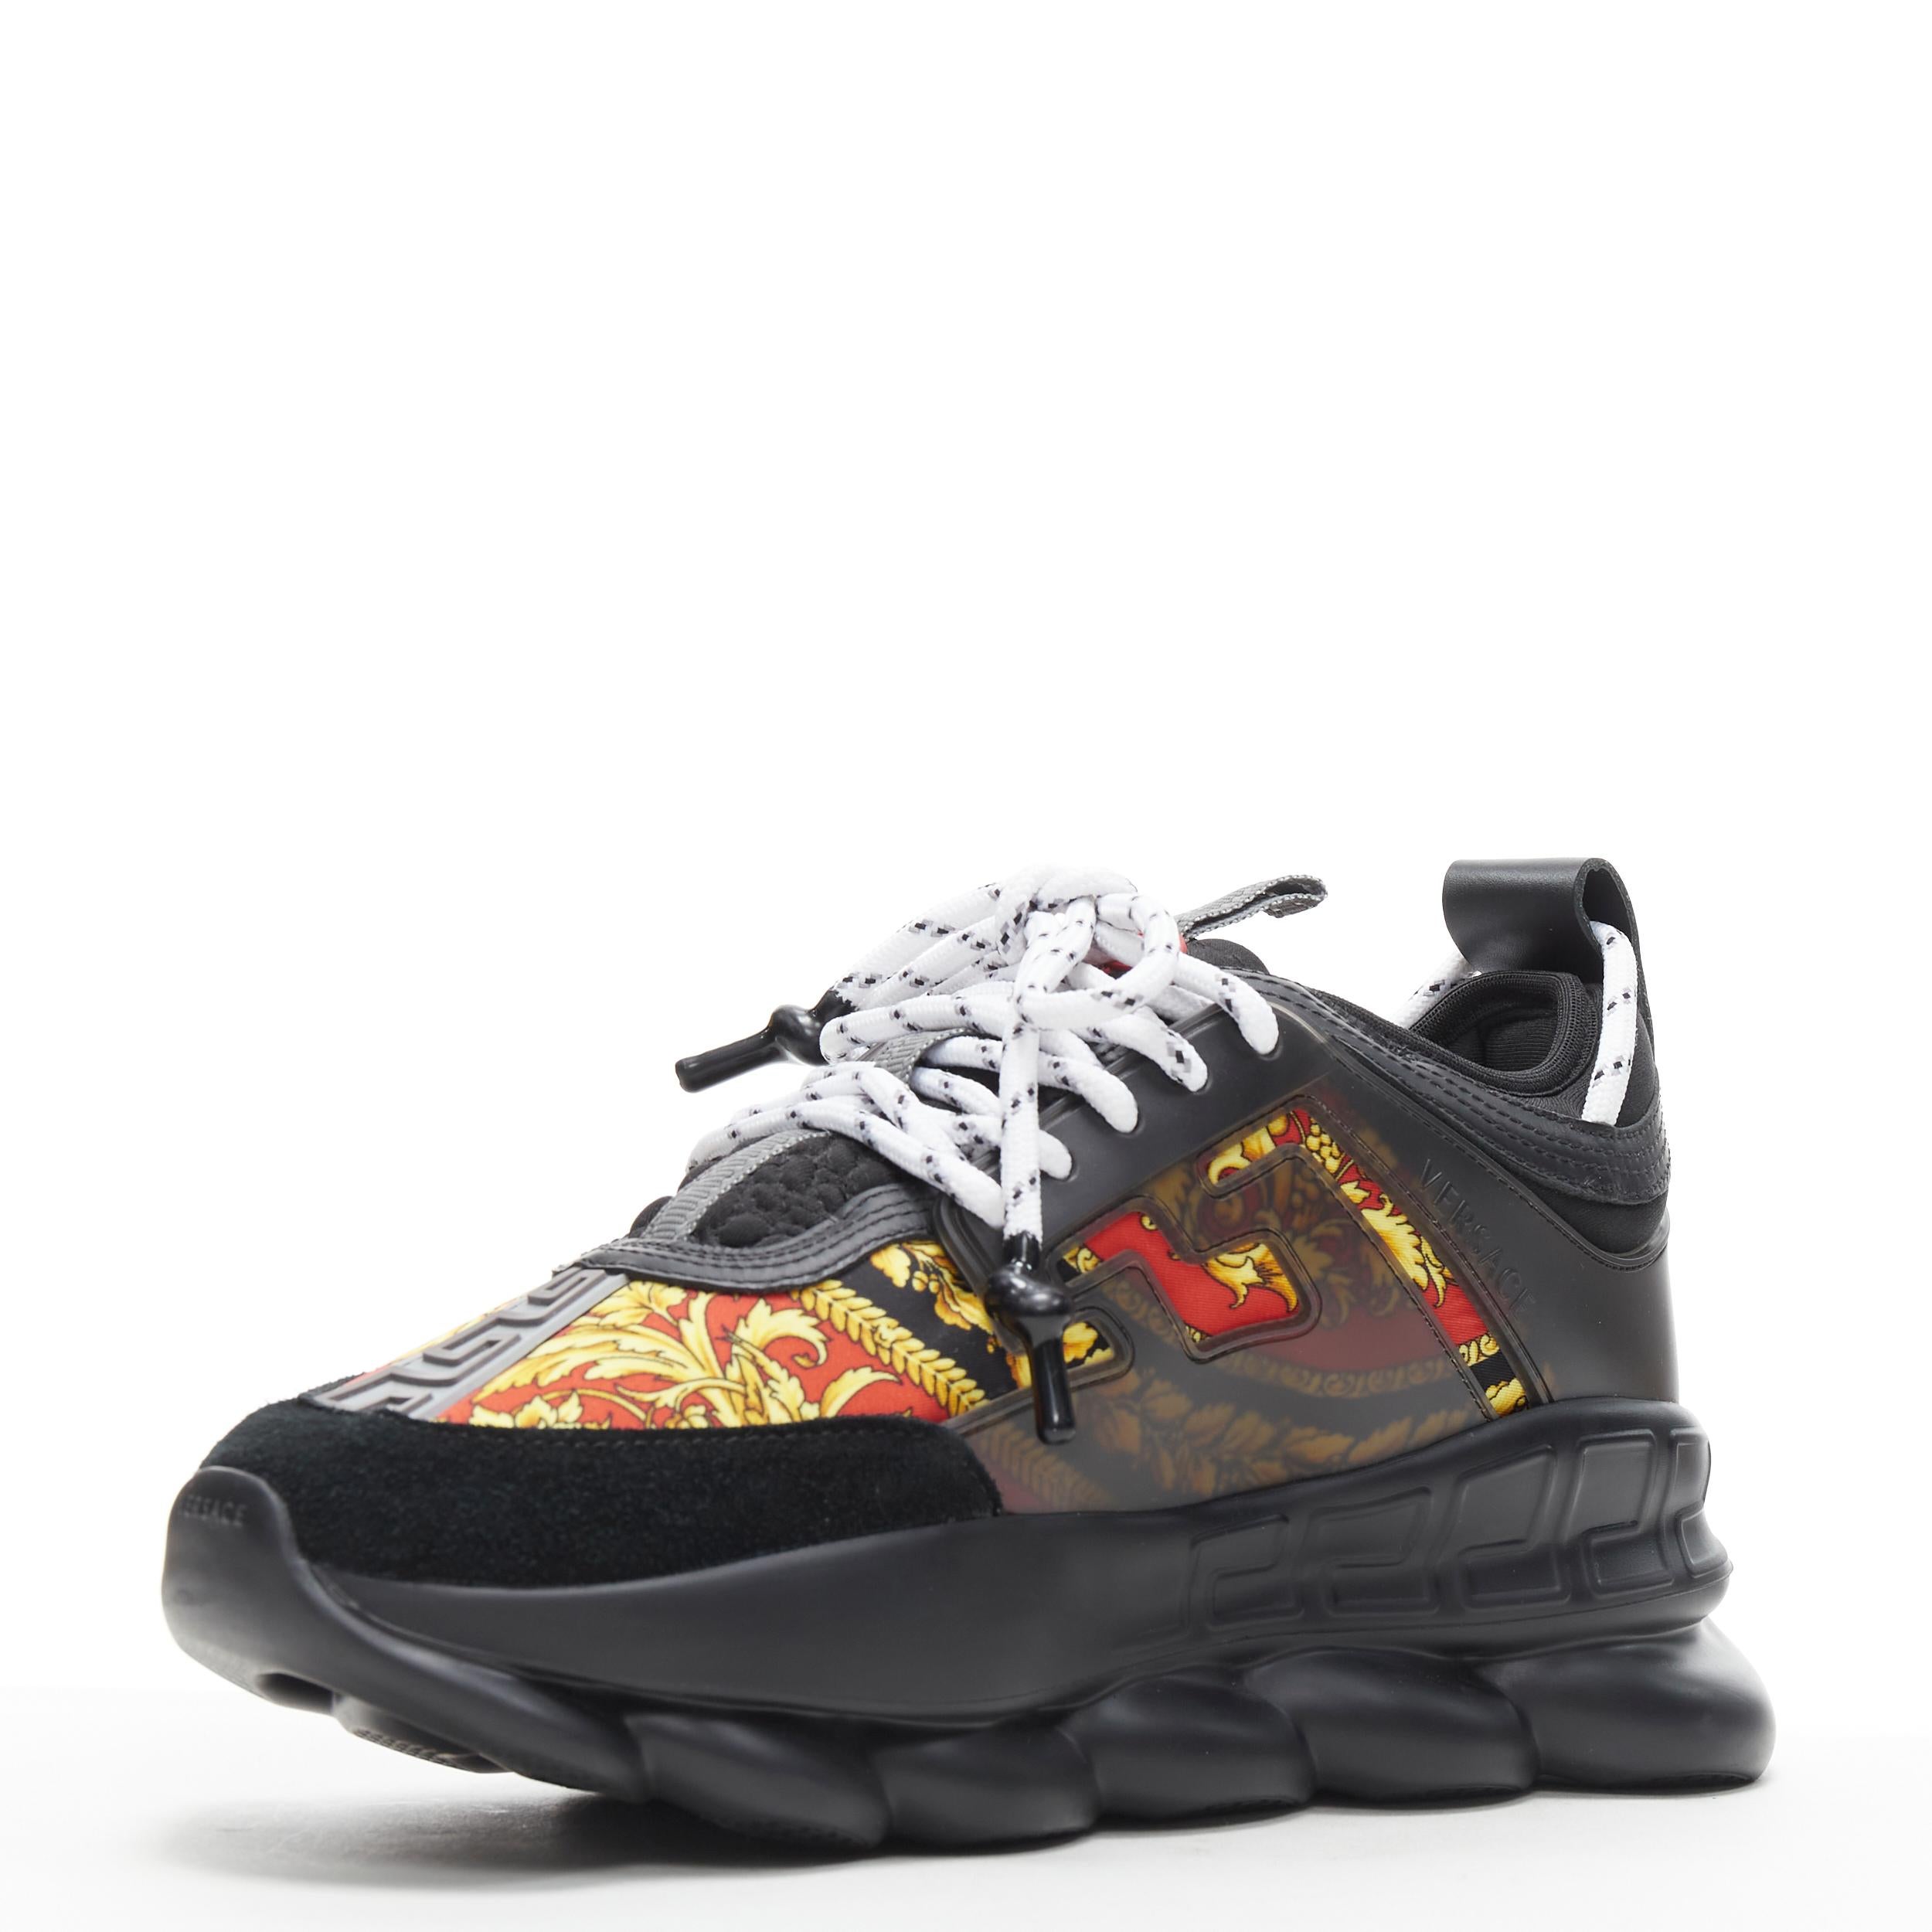 Black new VERSACE Chain Reaction black red barocco twill low chunky sneaker EU41 US8